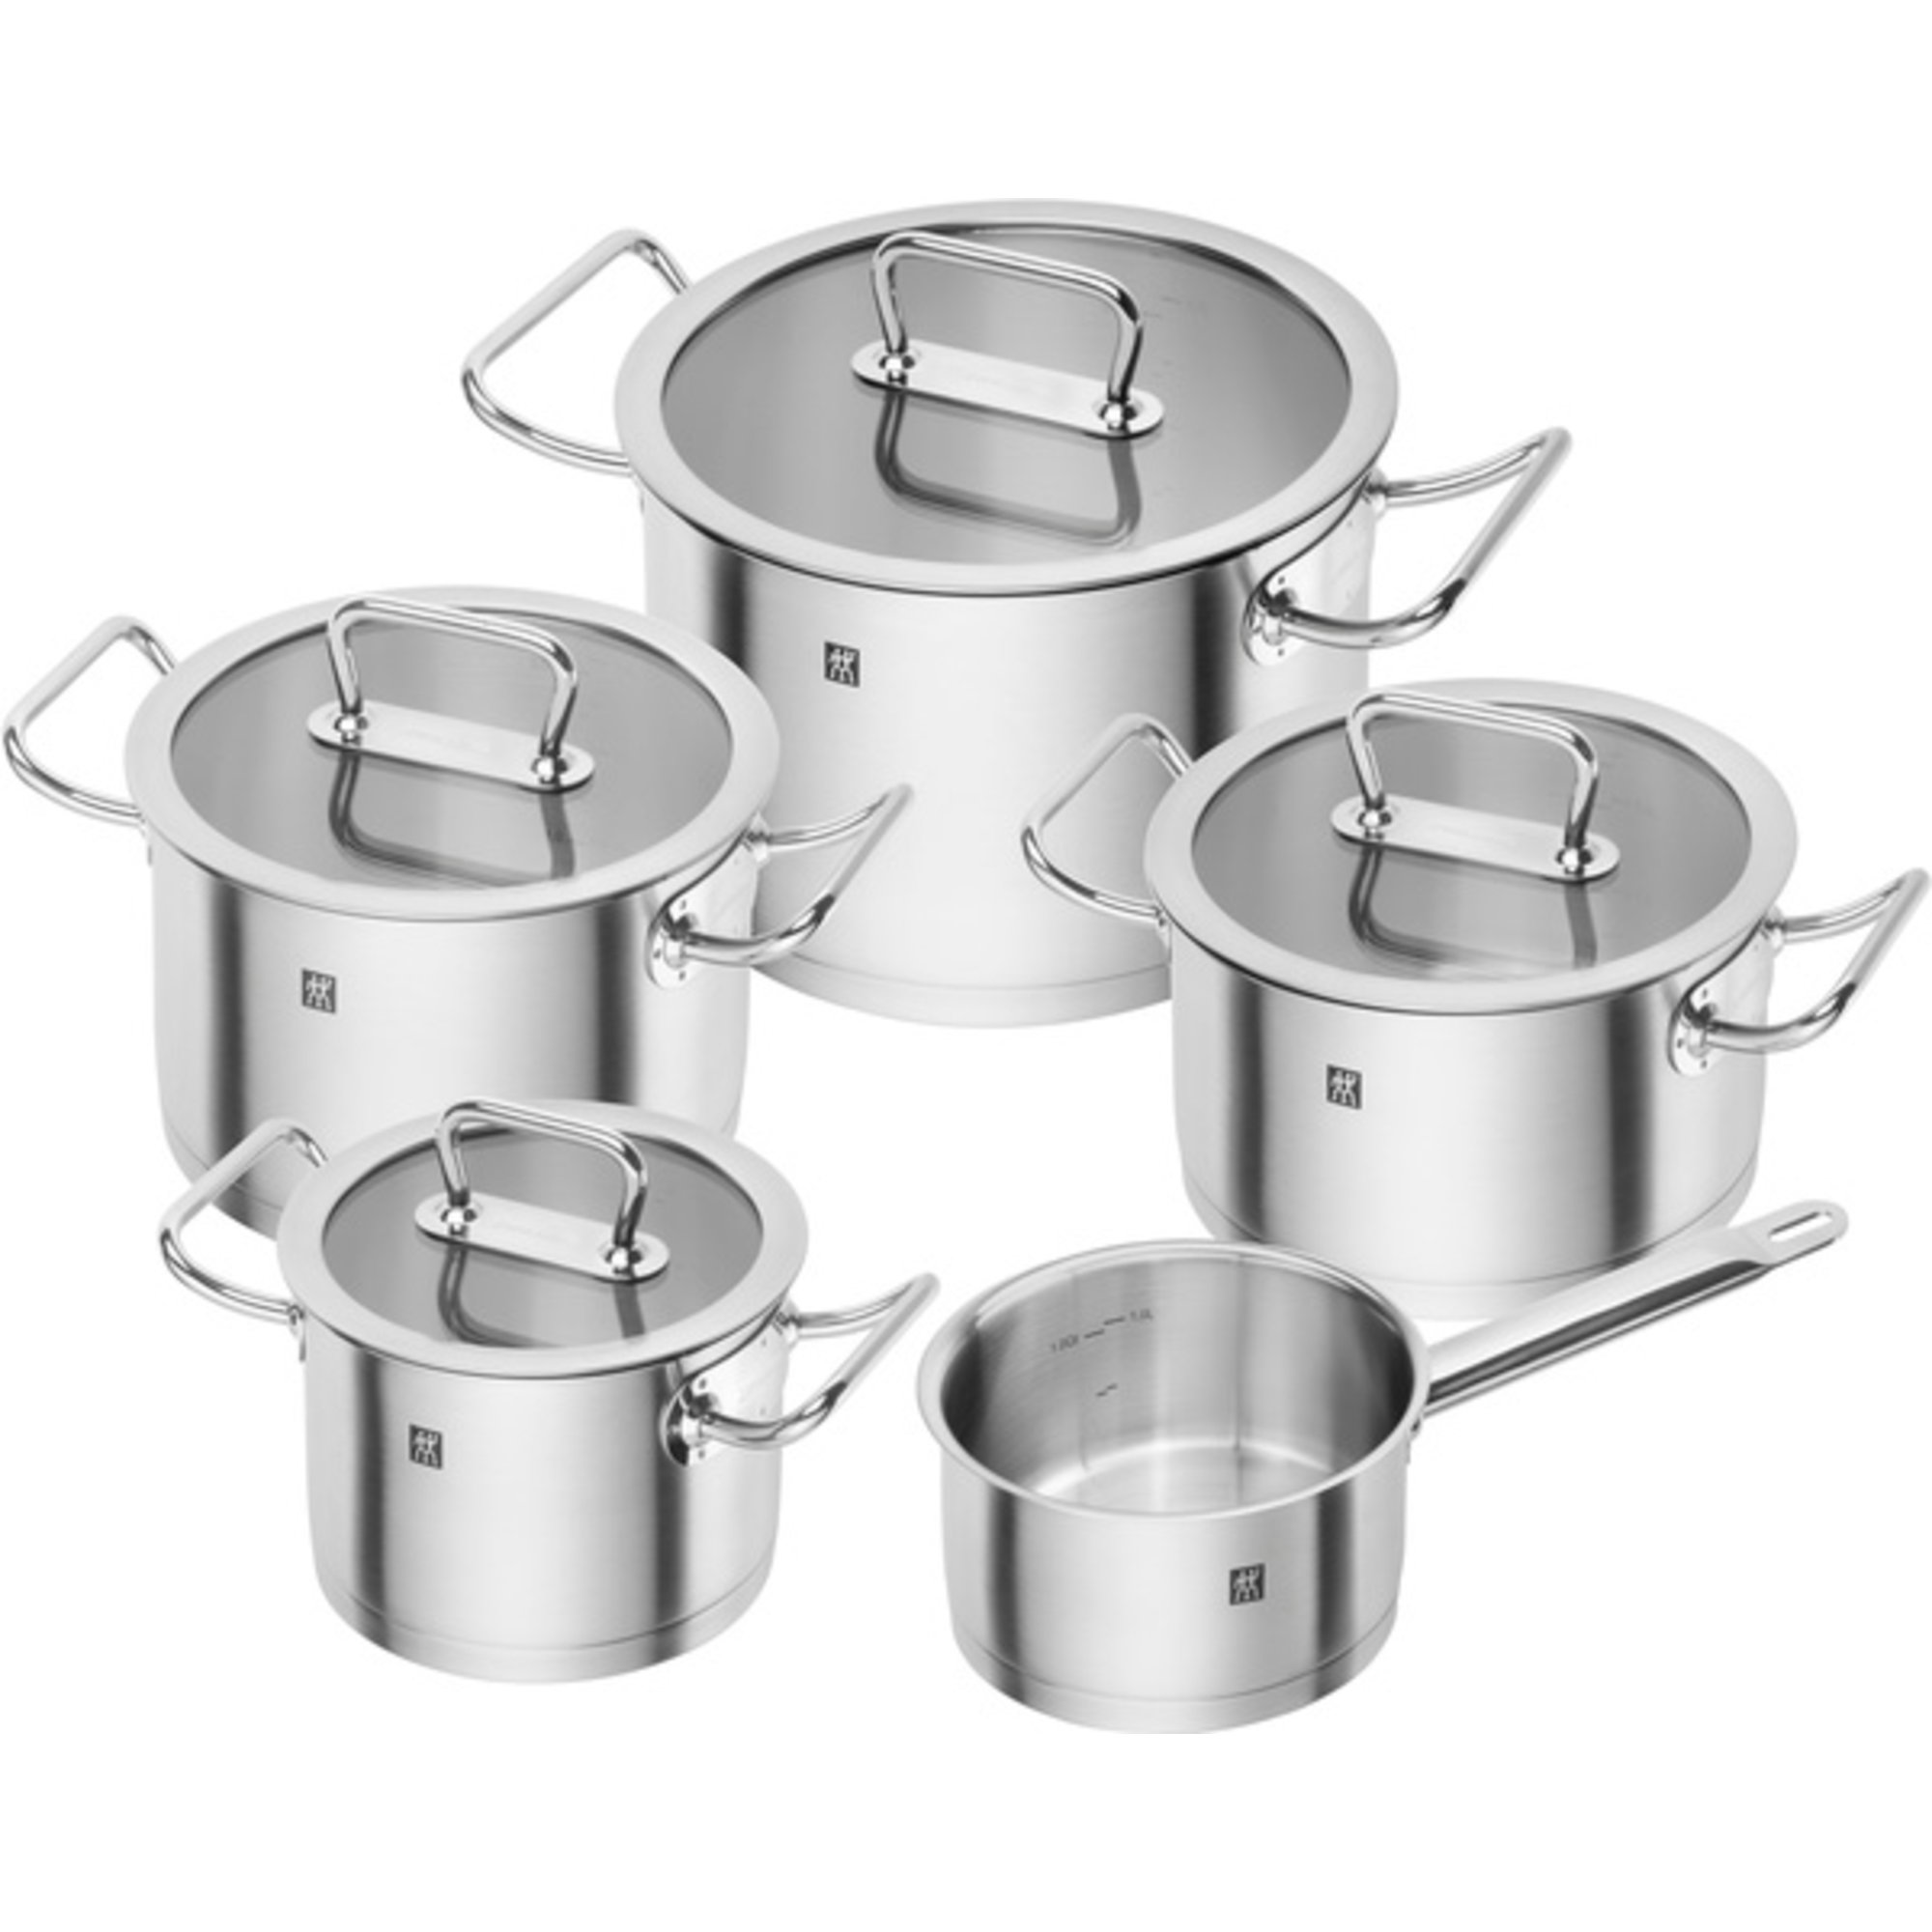 Zwilling Pro cookware set - 5 items